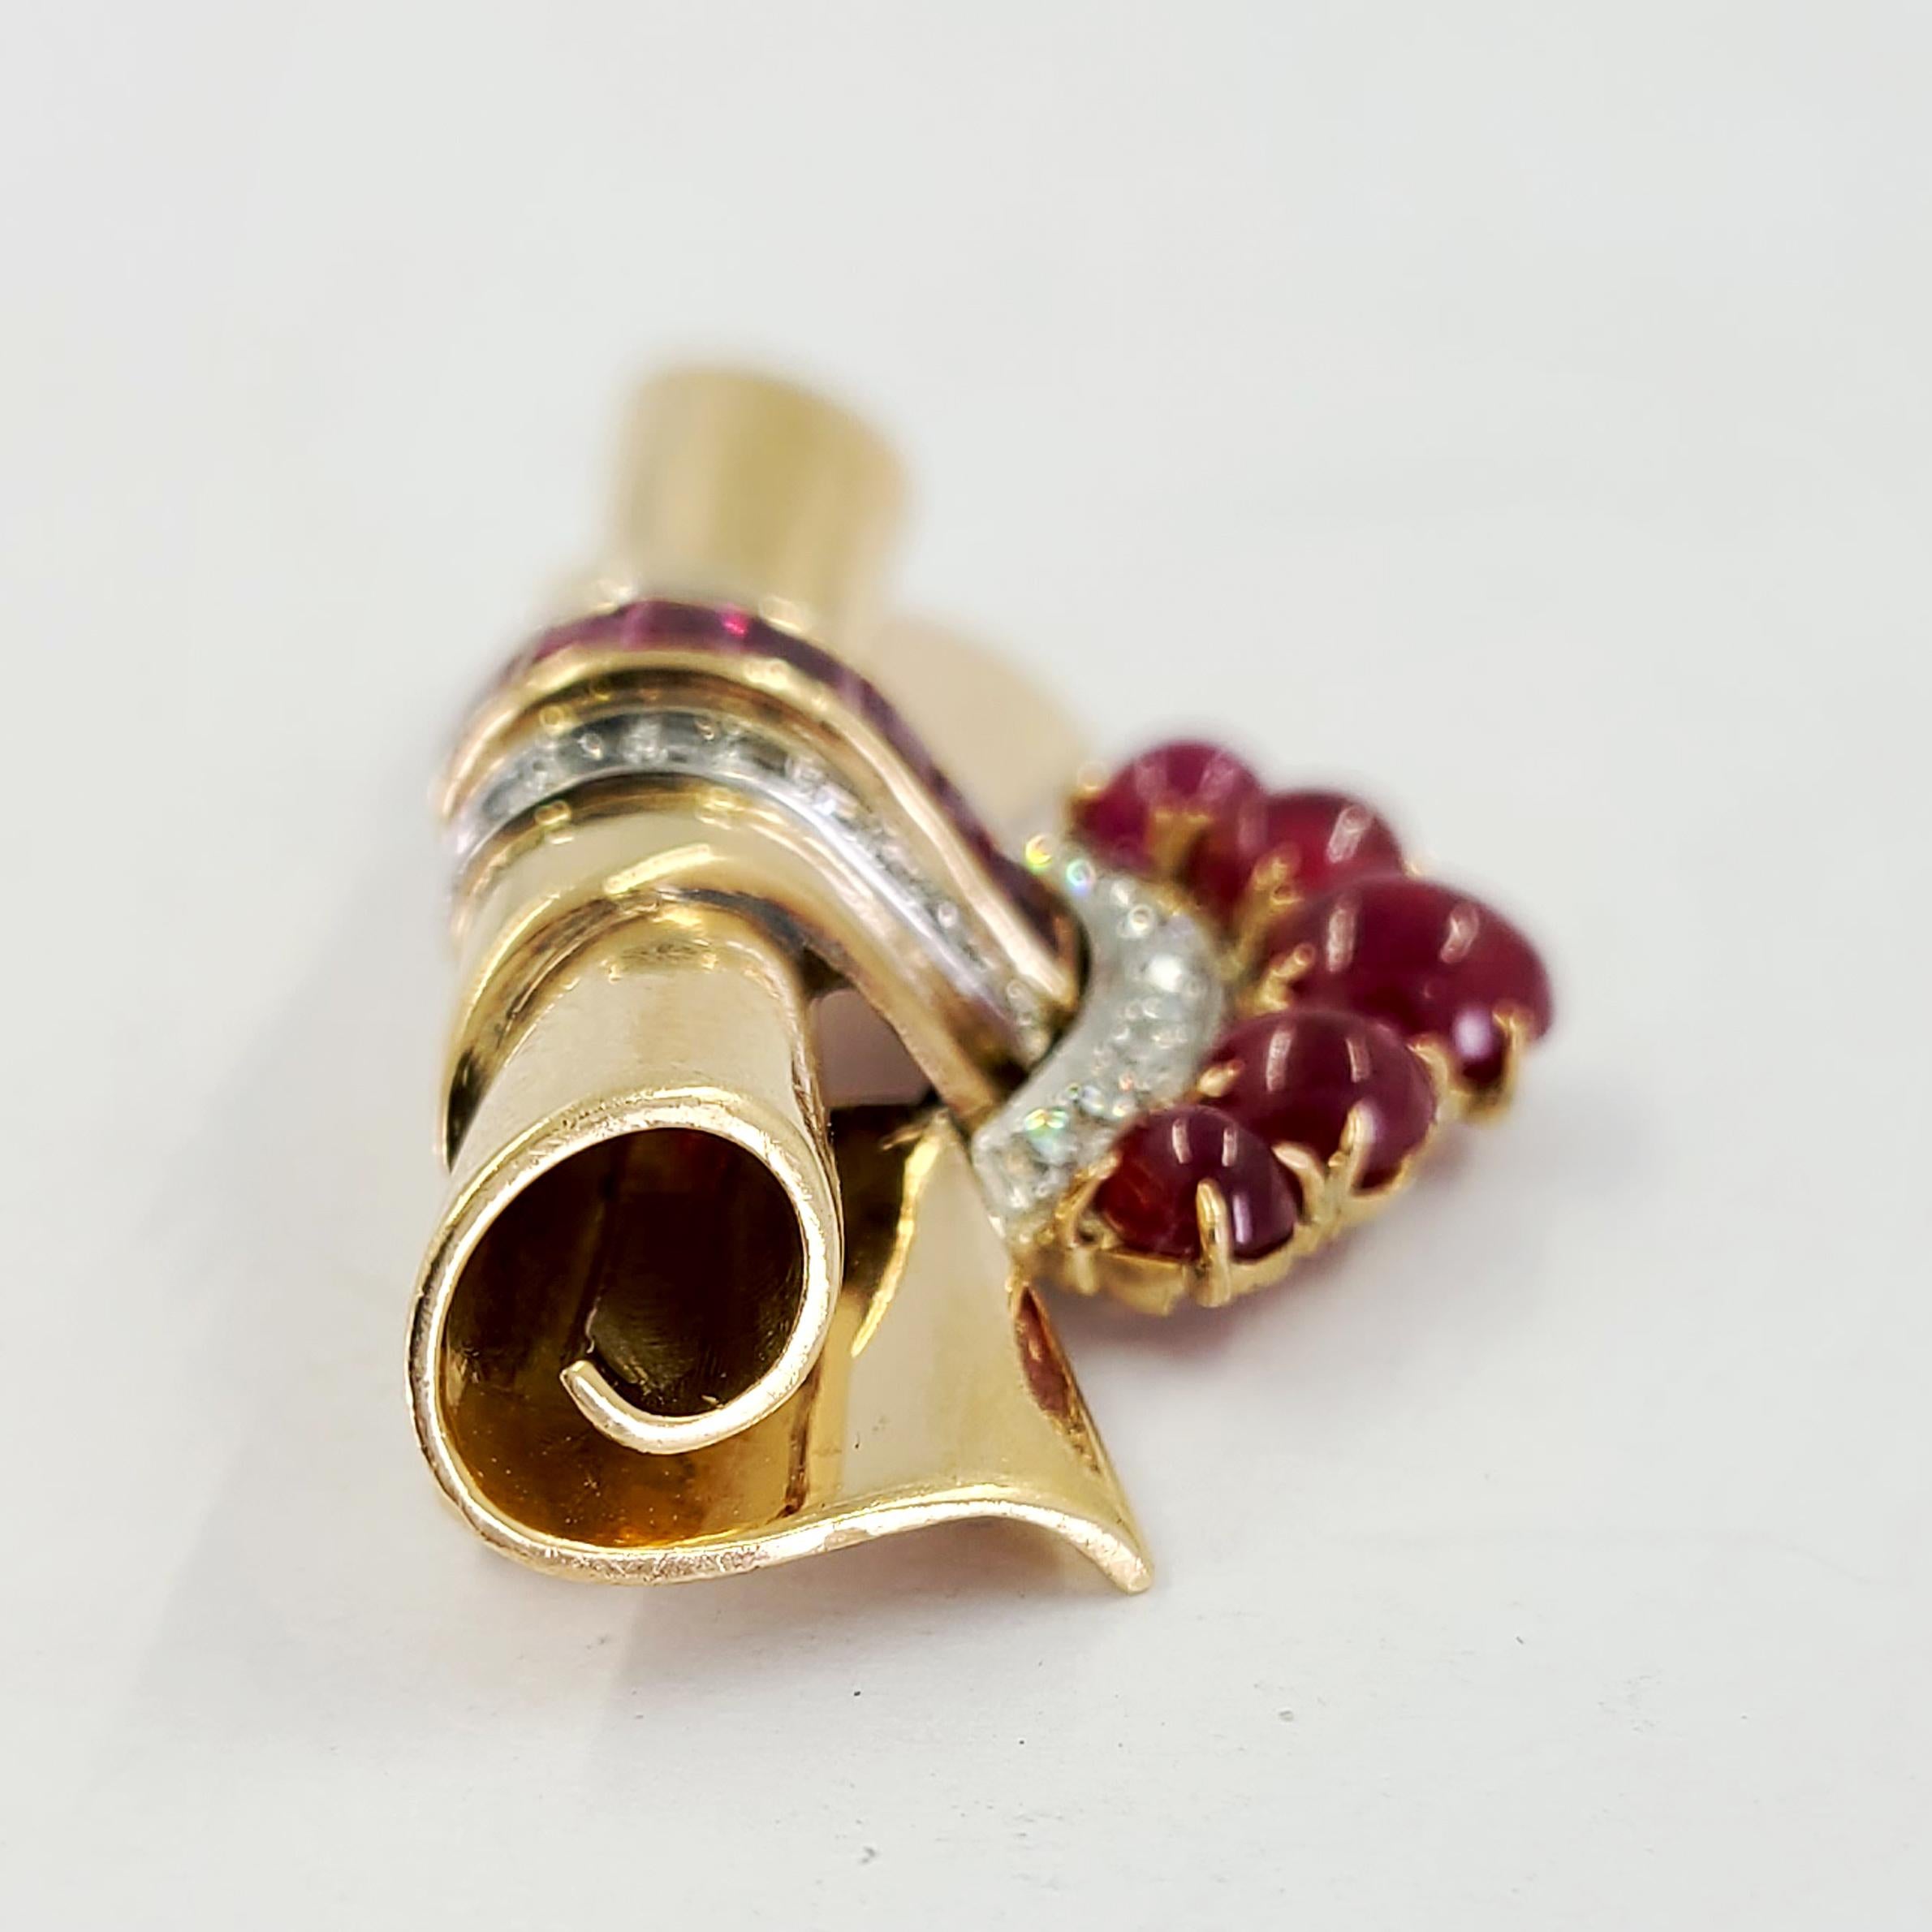 14 Karat Yellow Gold Scroll Brooch/Pin Featuring 12 Cabochon & Square Cut Rubies Totaling Approximately 1.00 Carat & 24 Single Cut Diamonds Of VS Clarity & G/H Color Totaling Approximately 0.50 Carat. 10 Karat Yellow Gold Pin Attachment. Finished